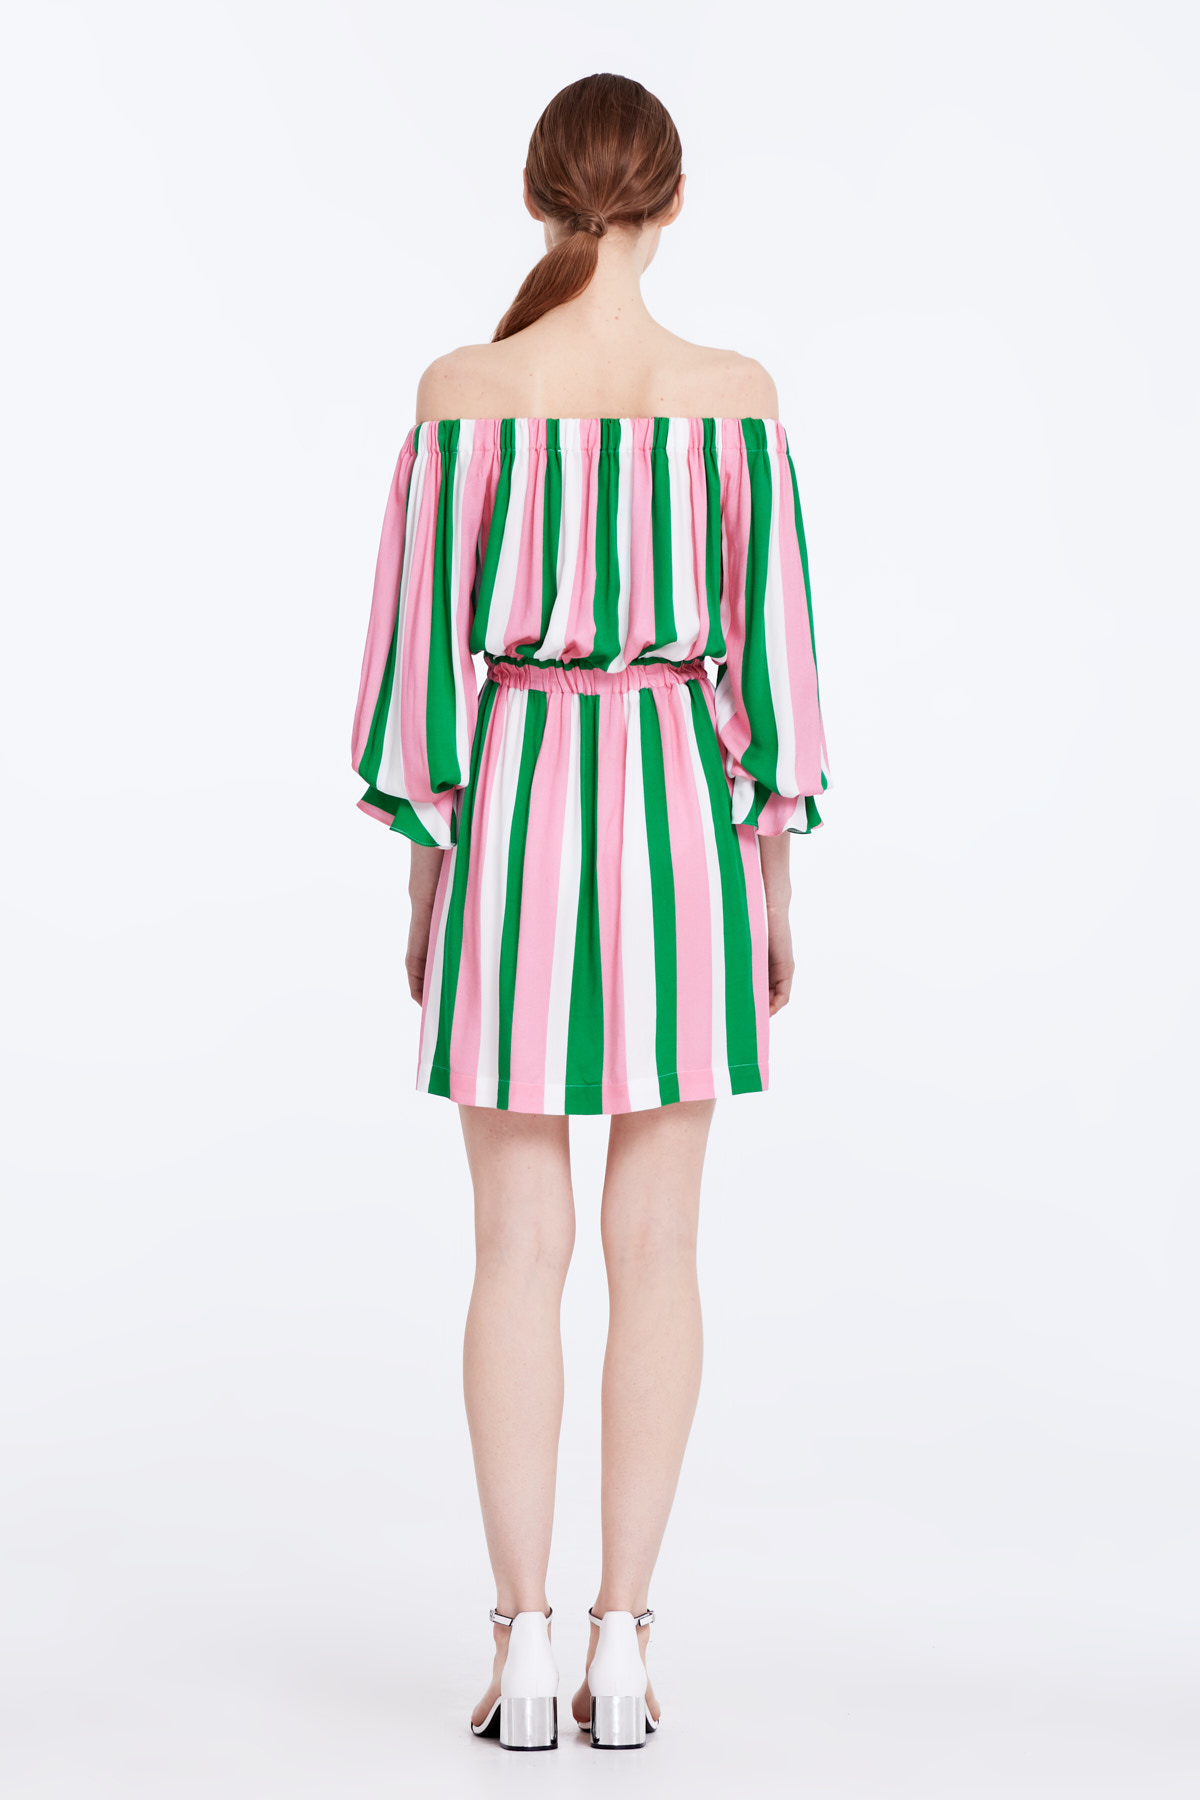 Off-shoulder dress with white, green and pink stripes, photo 6